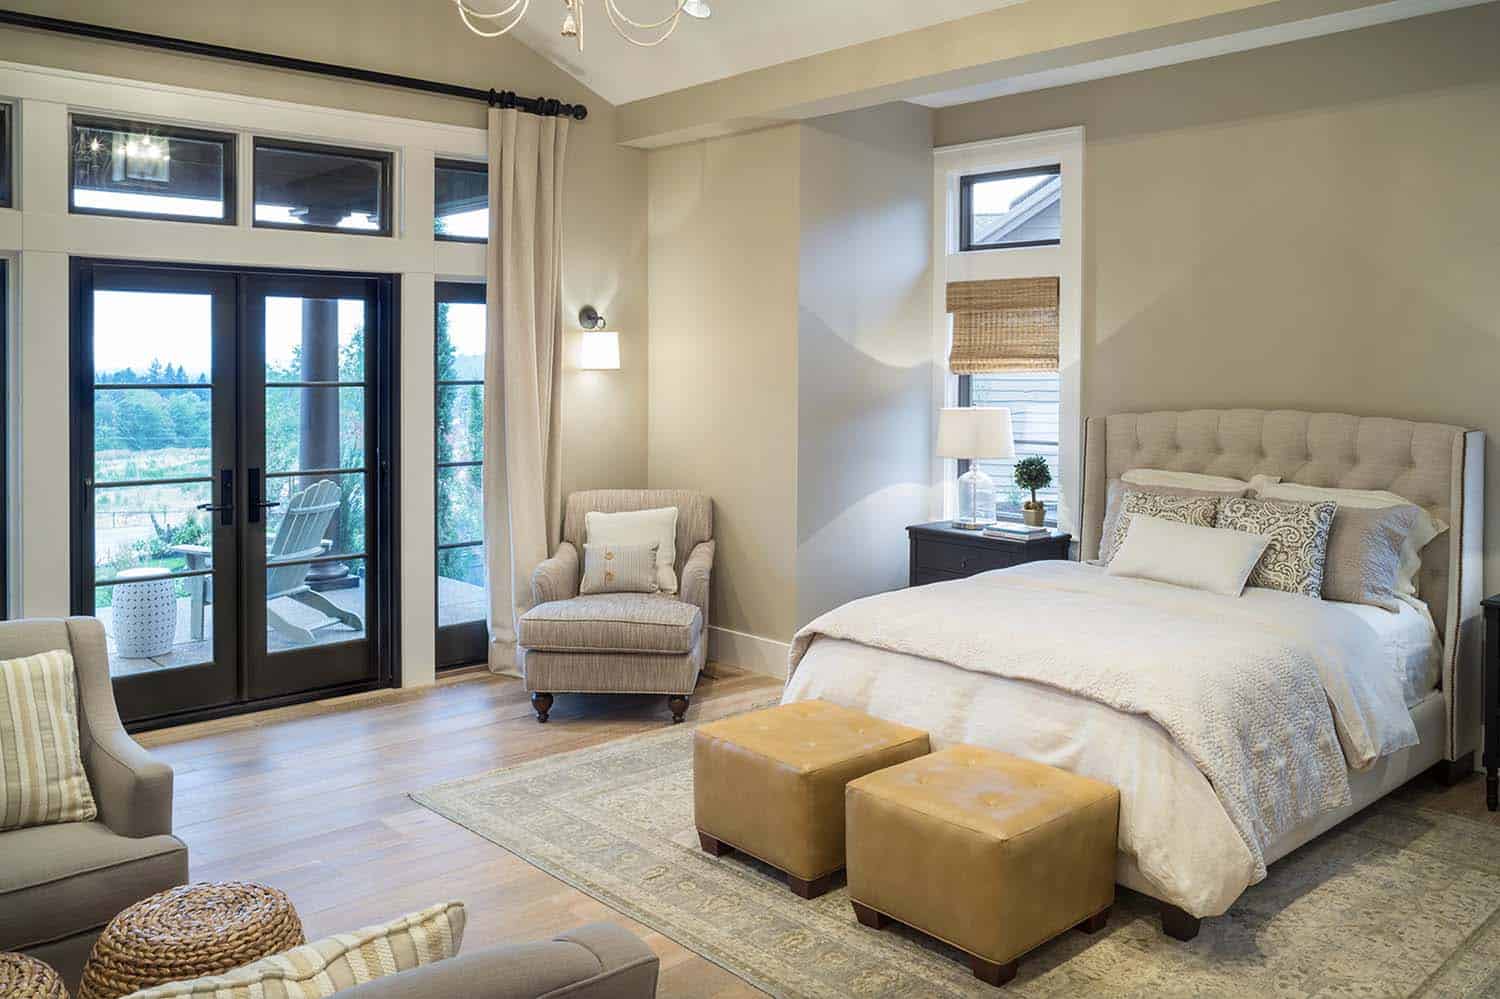 transitional style bedroom